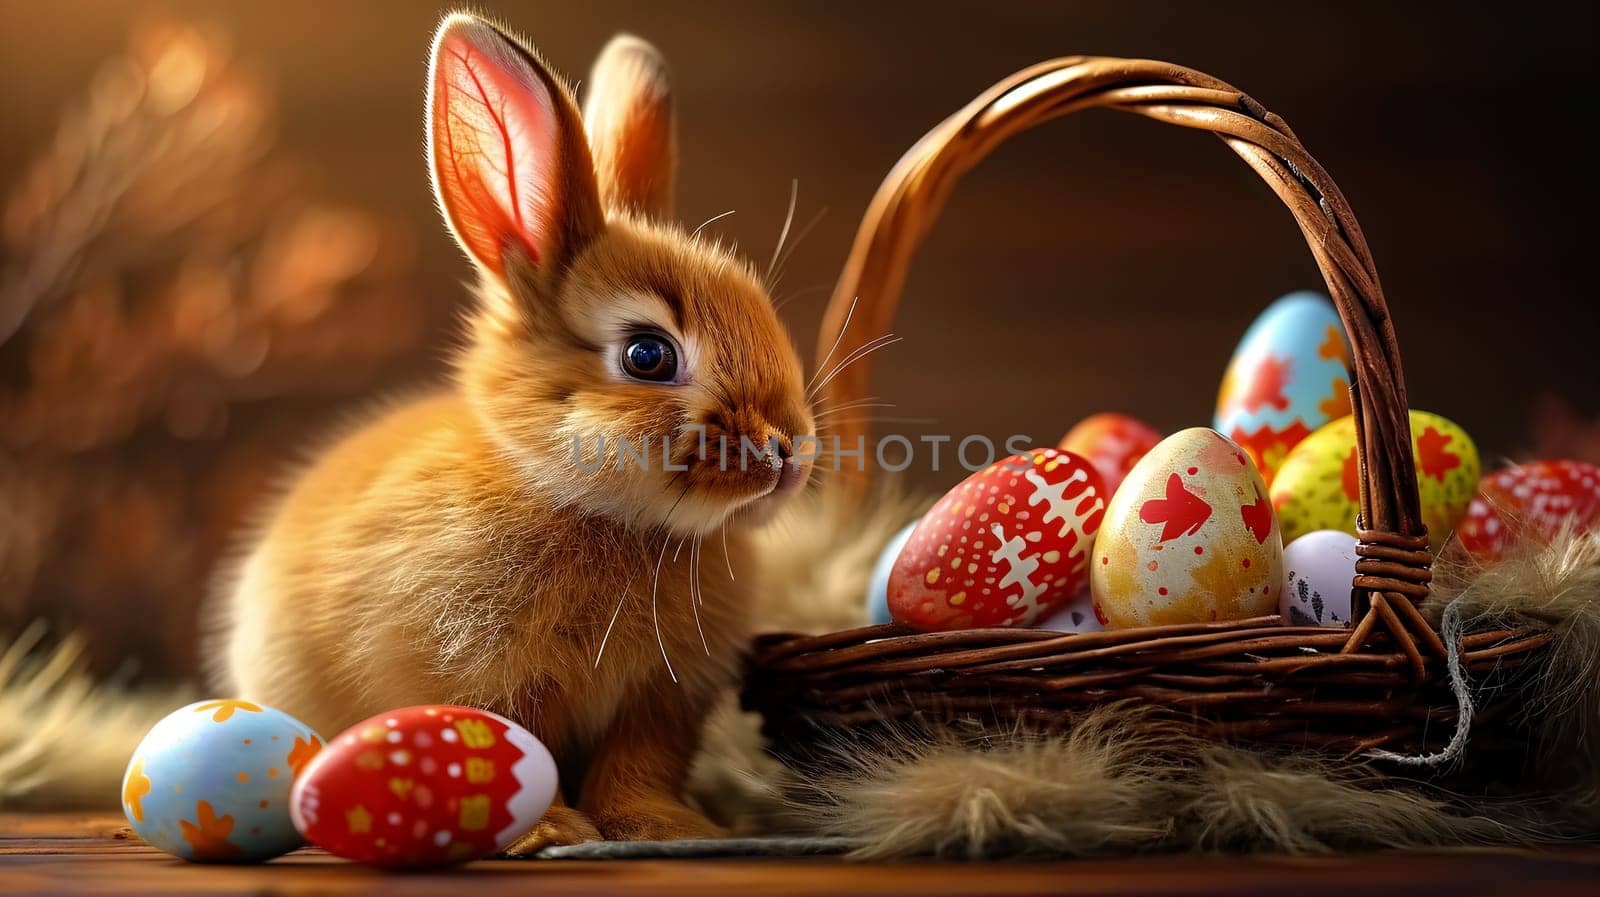 An Enchanting Easter : an adorable bunny beside a wicker basket filled with exquisitely painted eggs by chrisroll